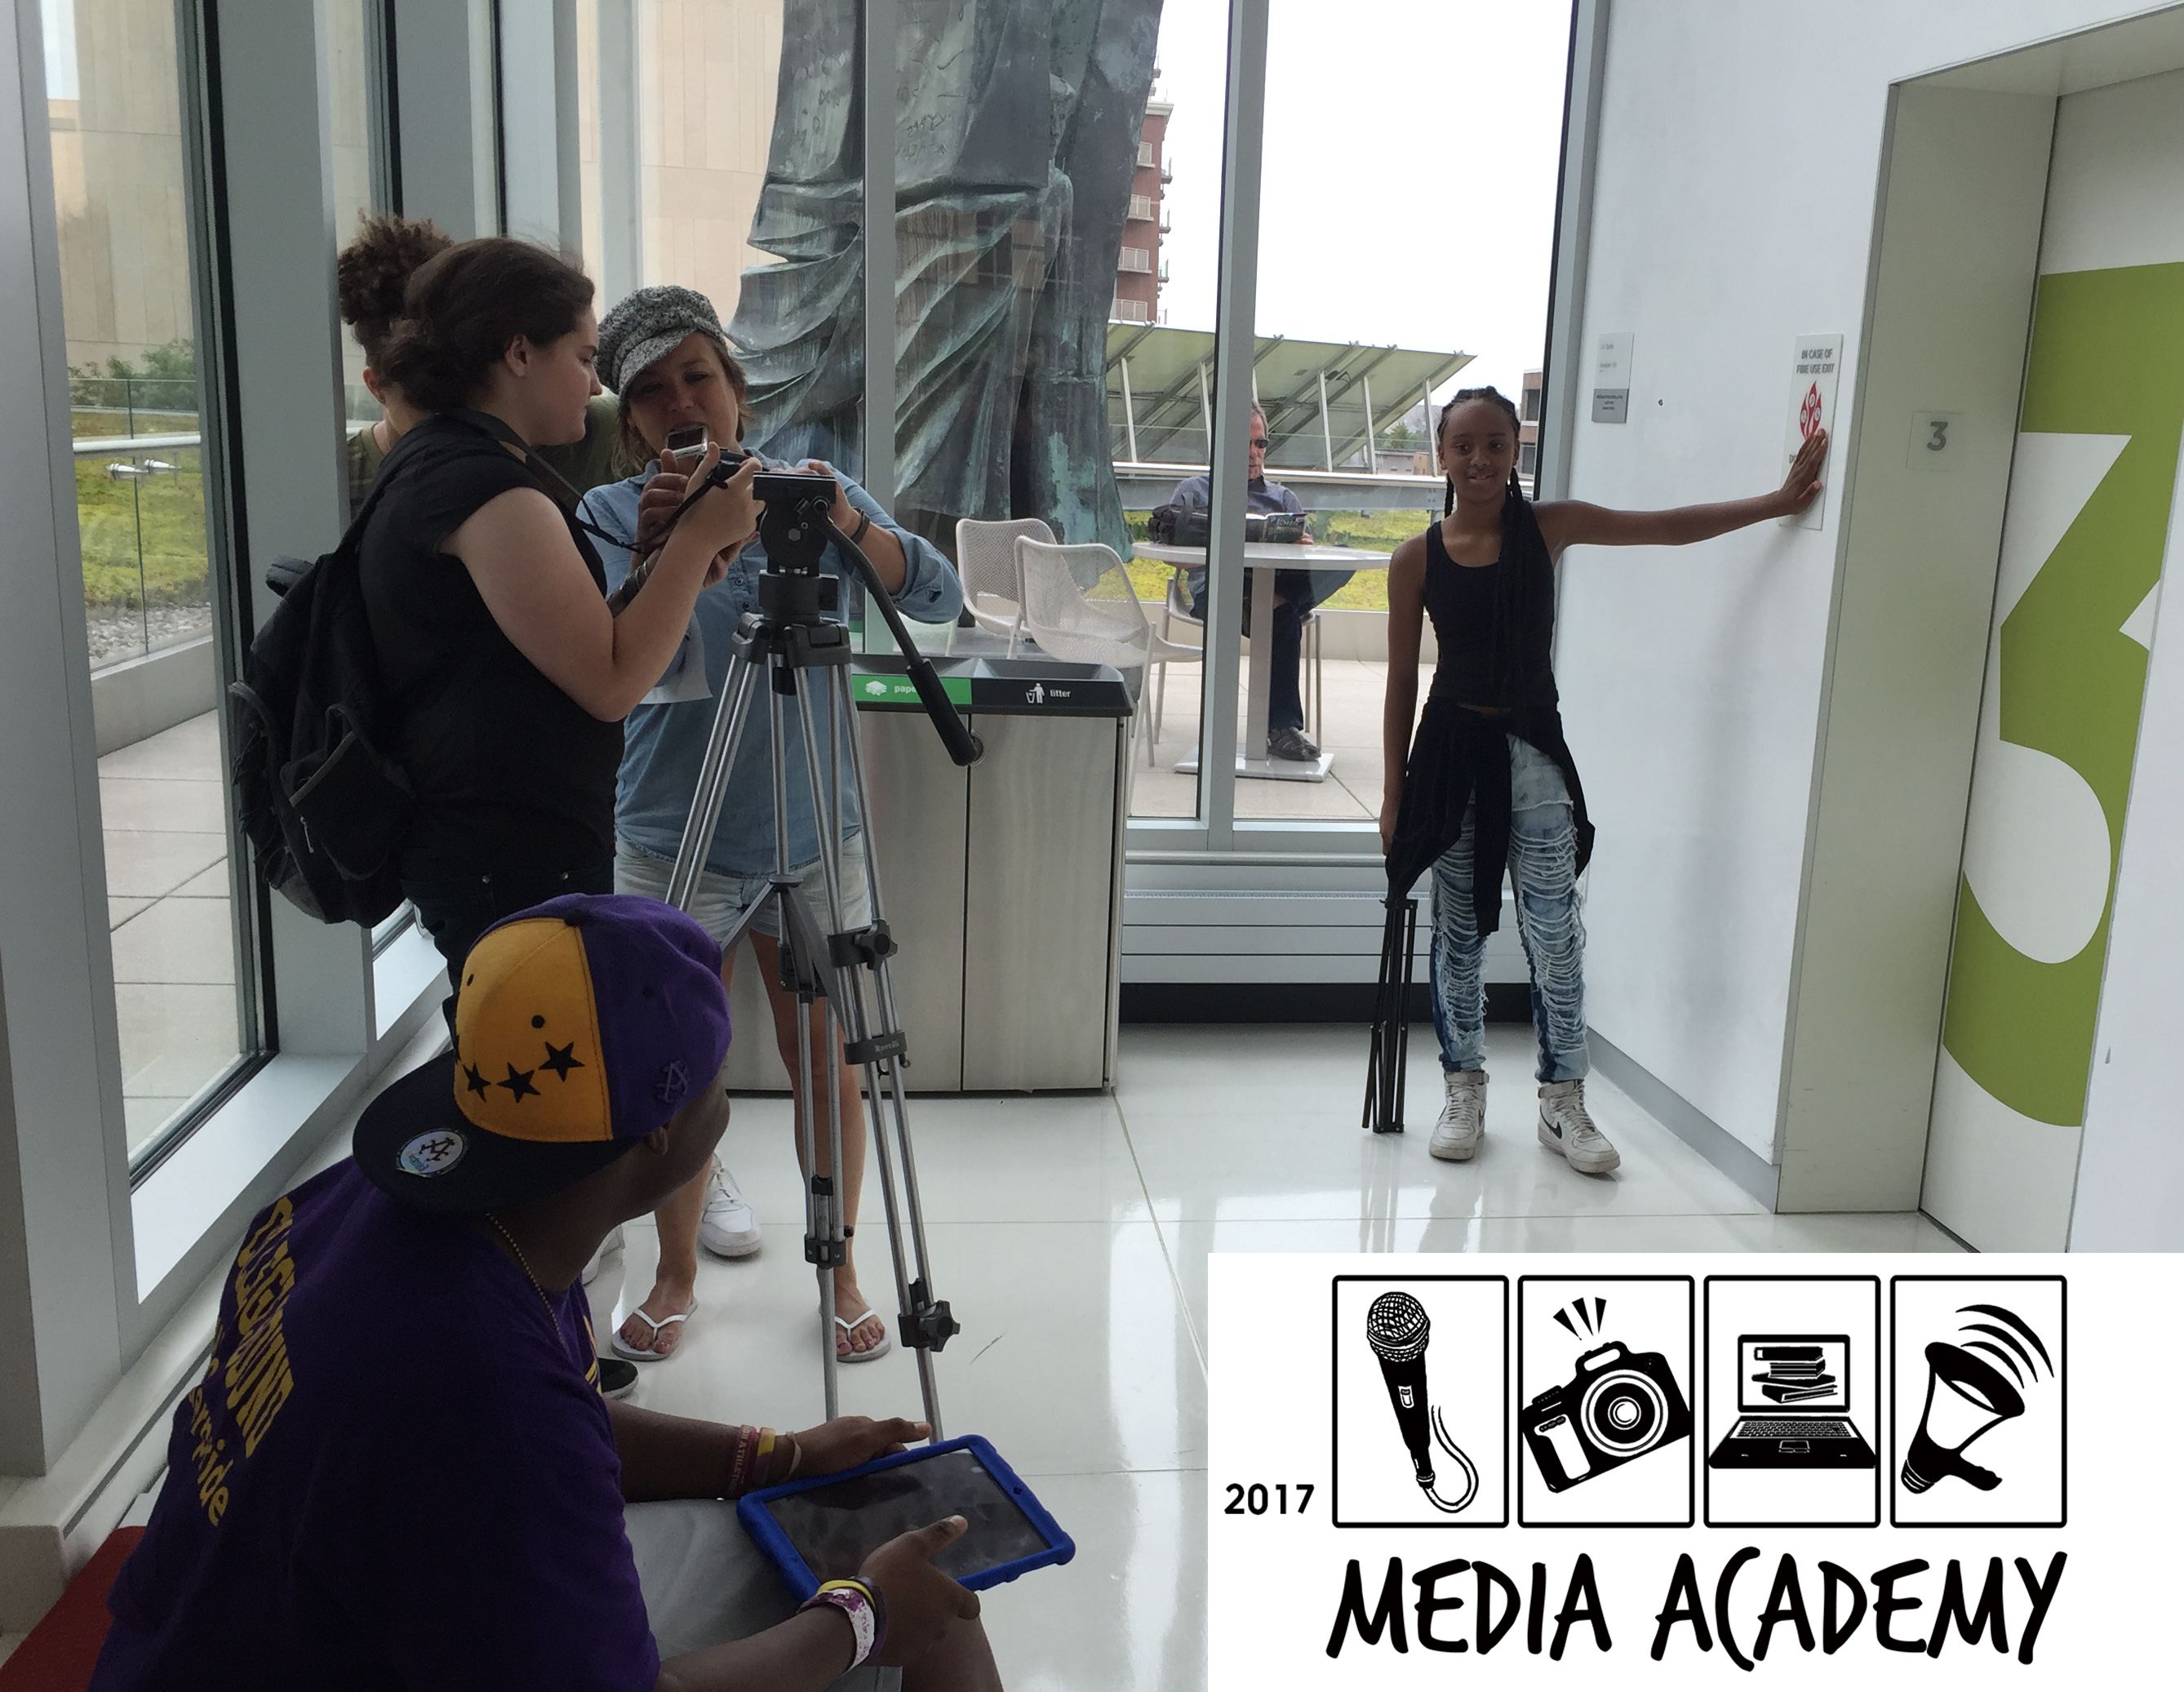 Picture of music video shoot for 2017 Media Academy